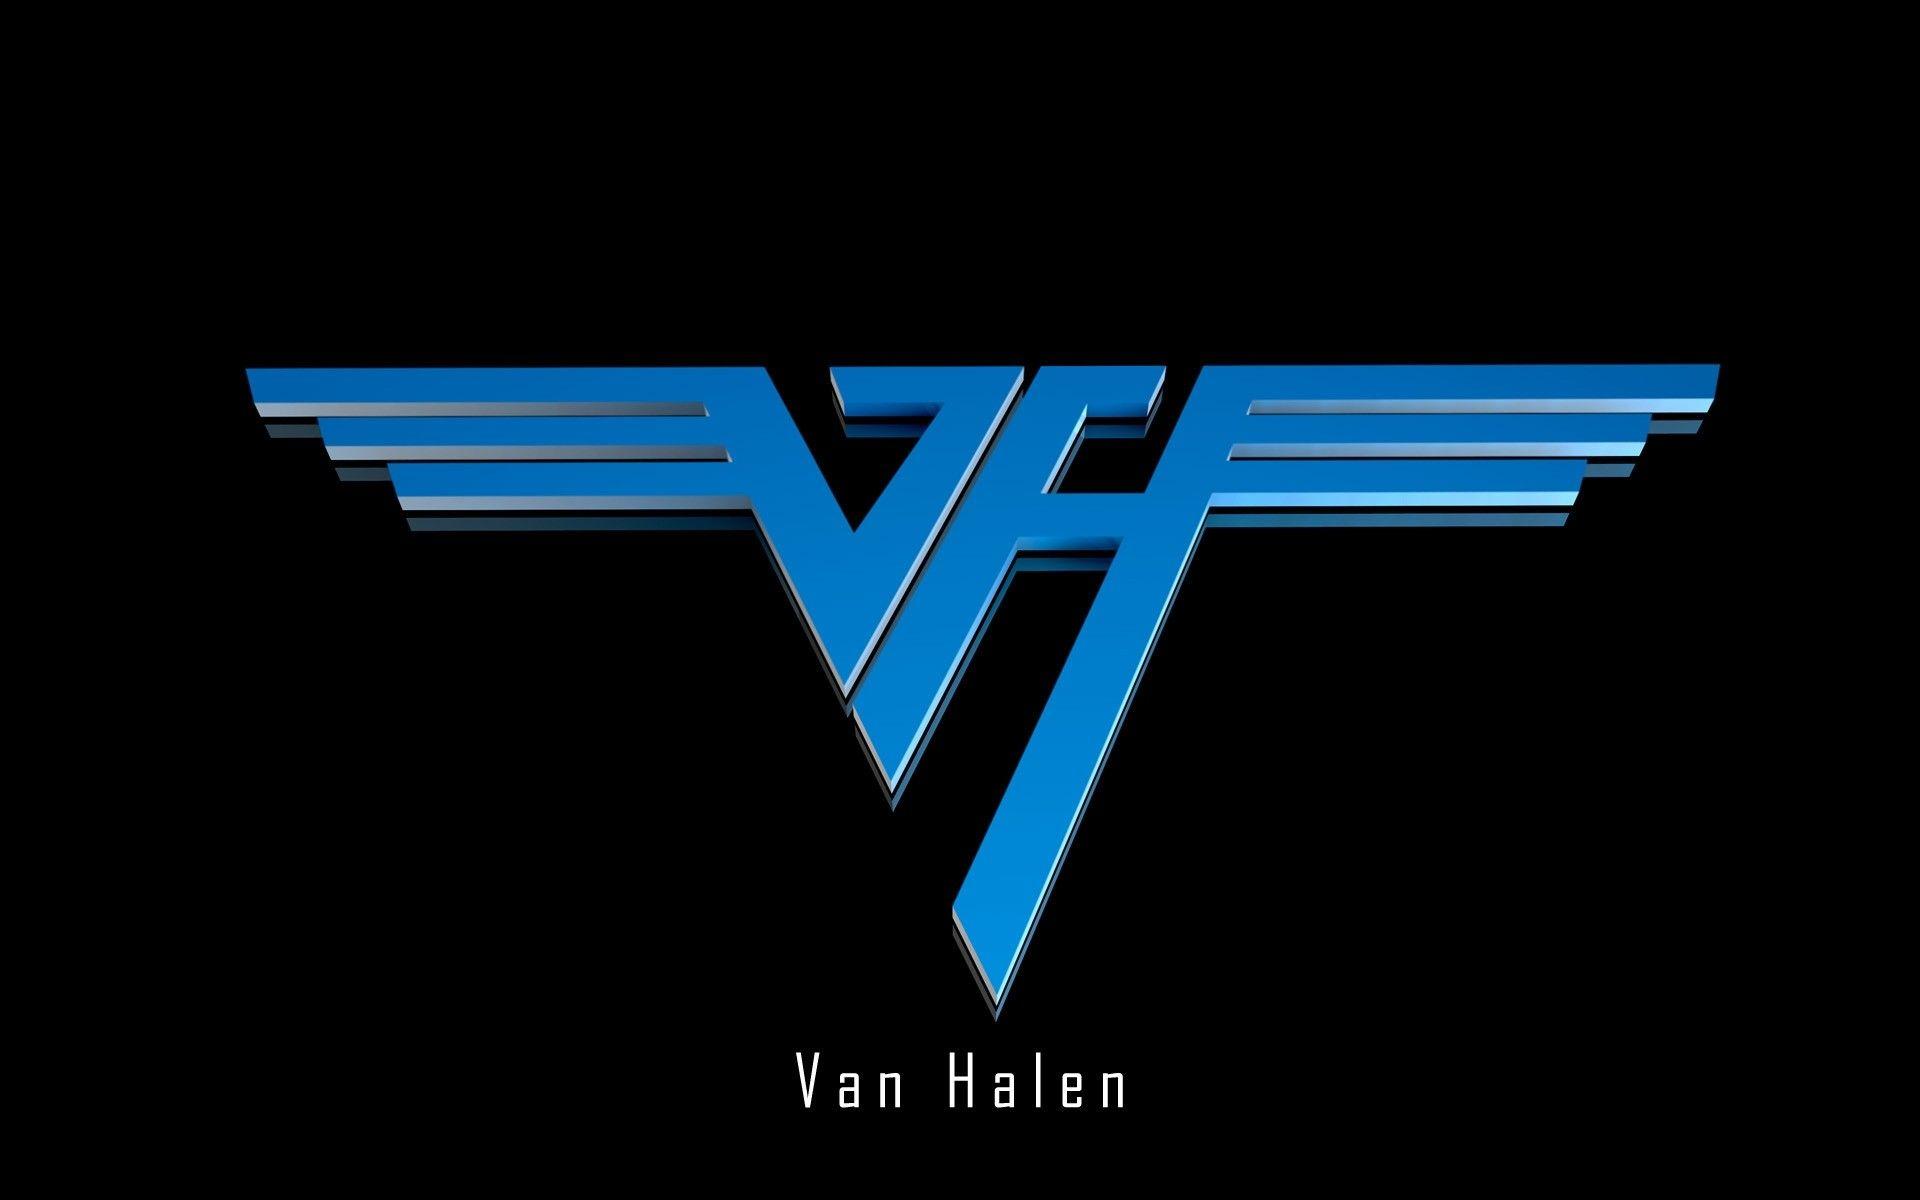 The Van Halen Logo. Android wallpaper for free